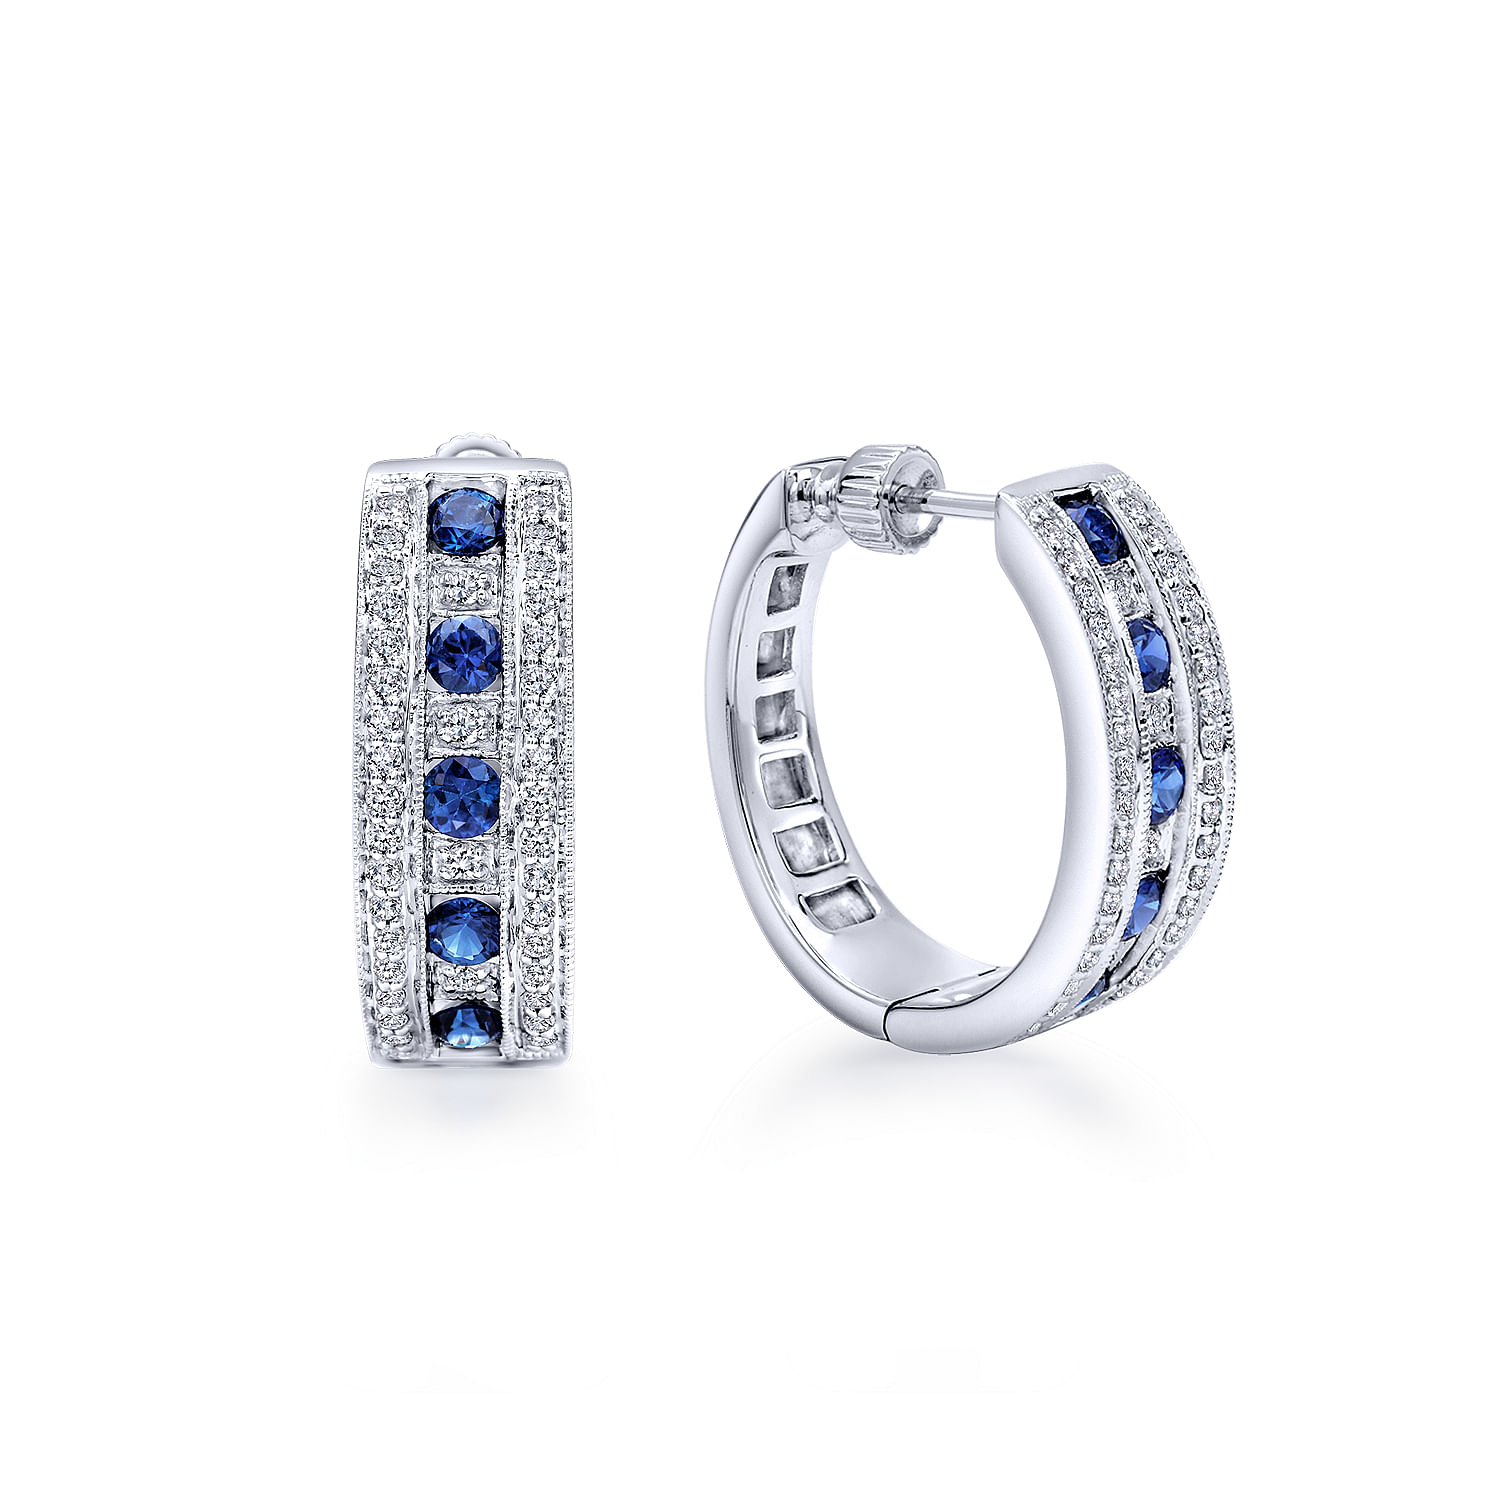 14K White Gold Prong Set/Channel 20mm Round Classic Diamond & Sapphire Hoop Earrings